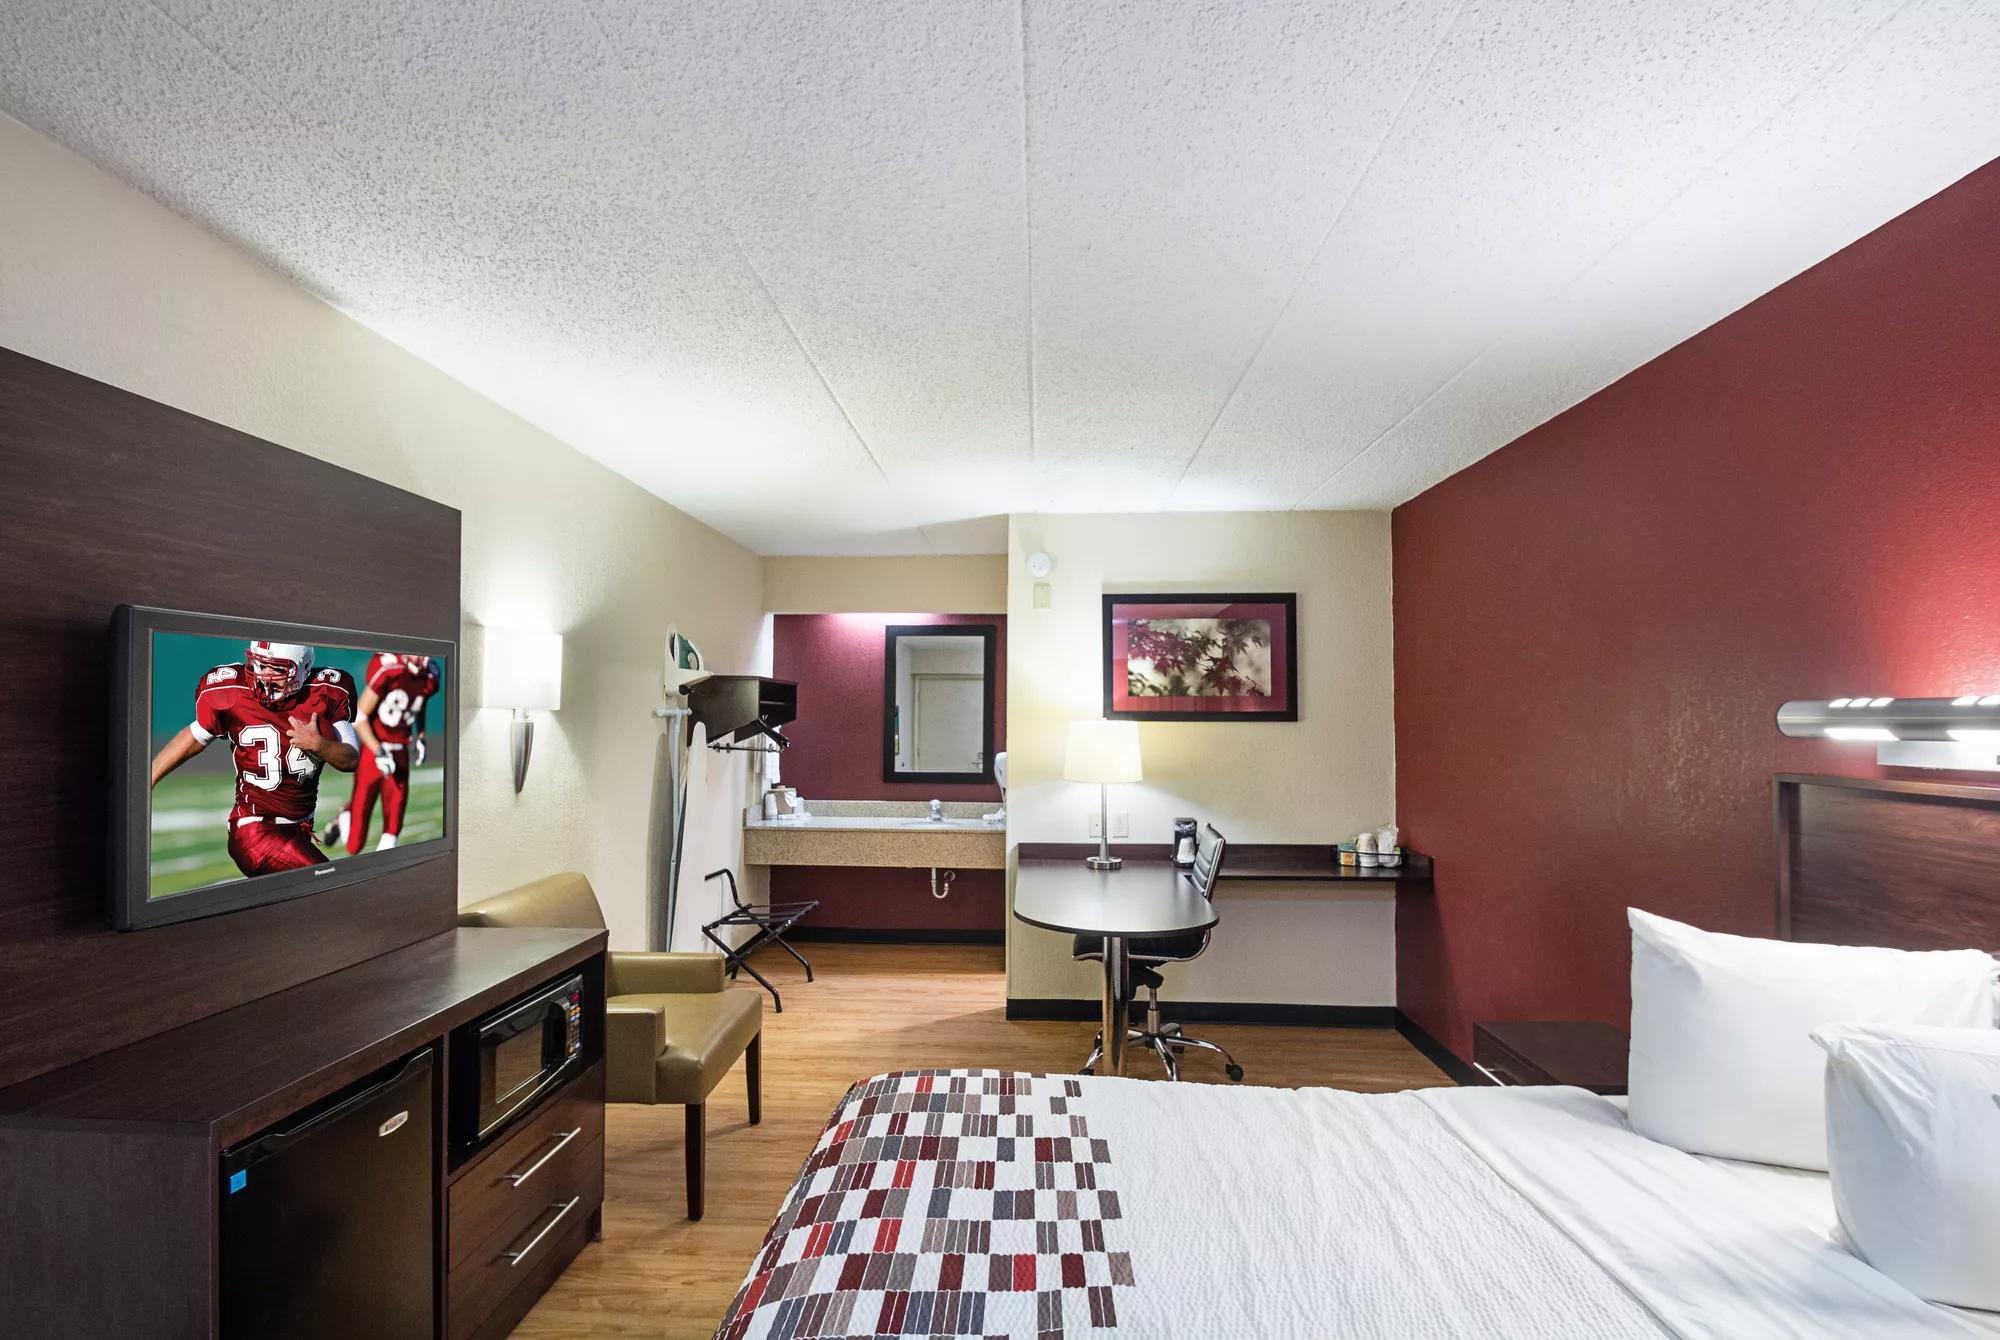 Red Roof Inn Minneapolis - Plymouth Superior King Room Image